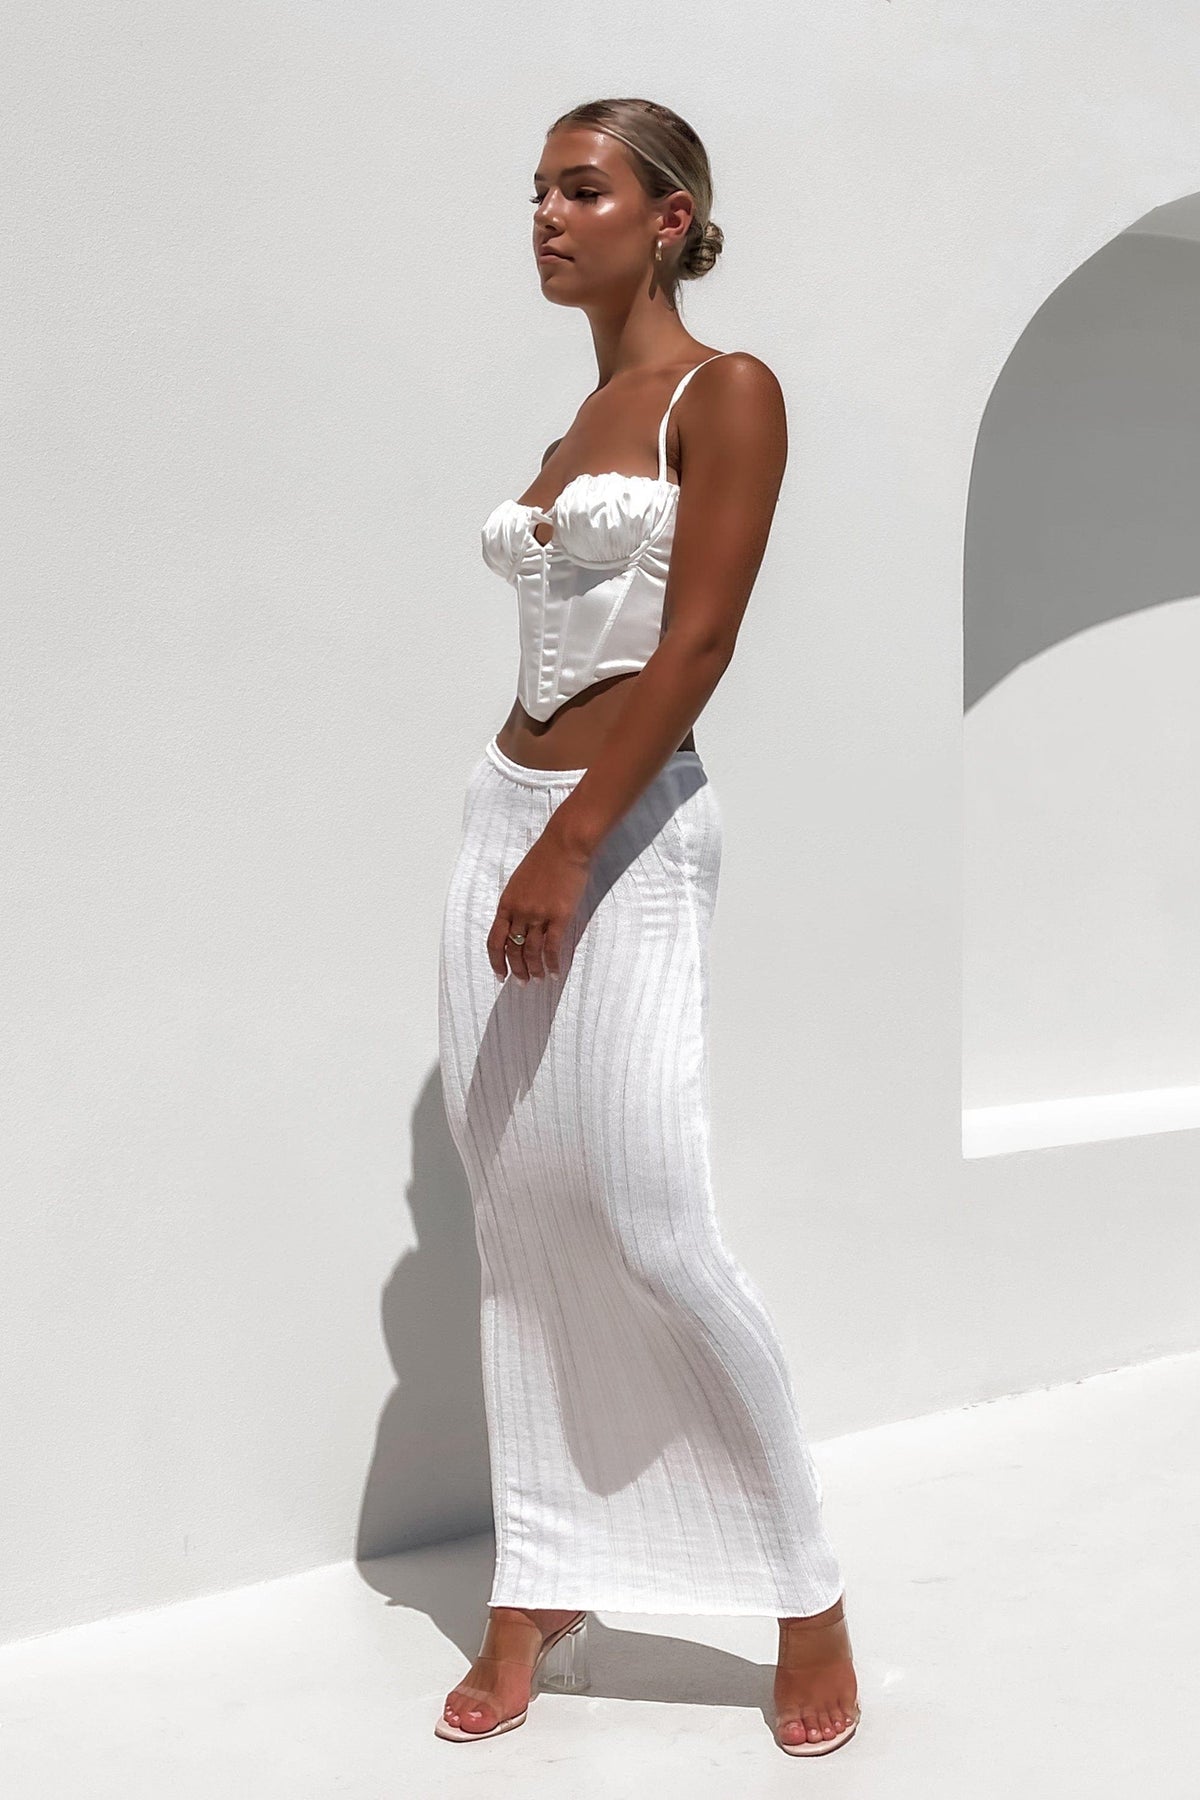 Lilian Skirt, BOTTOMS, MAXI SKIRT, NYLON, Sale, SKIRTS, VISCOSE, WHITE, , Our New Lilian Skirt is only $71.00-We Have The Latest Pants | Shorts | Skirts @ Mishkah Online Fashion Boutique-MISHKAH